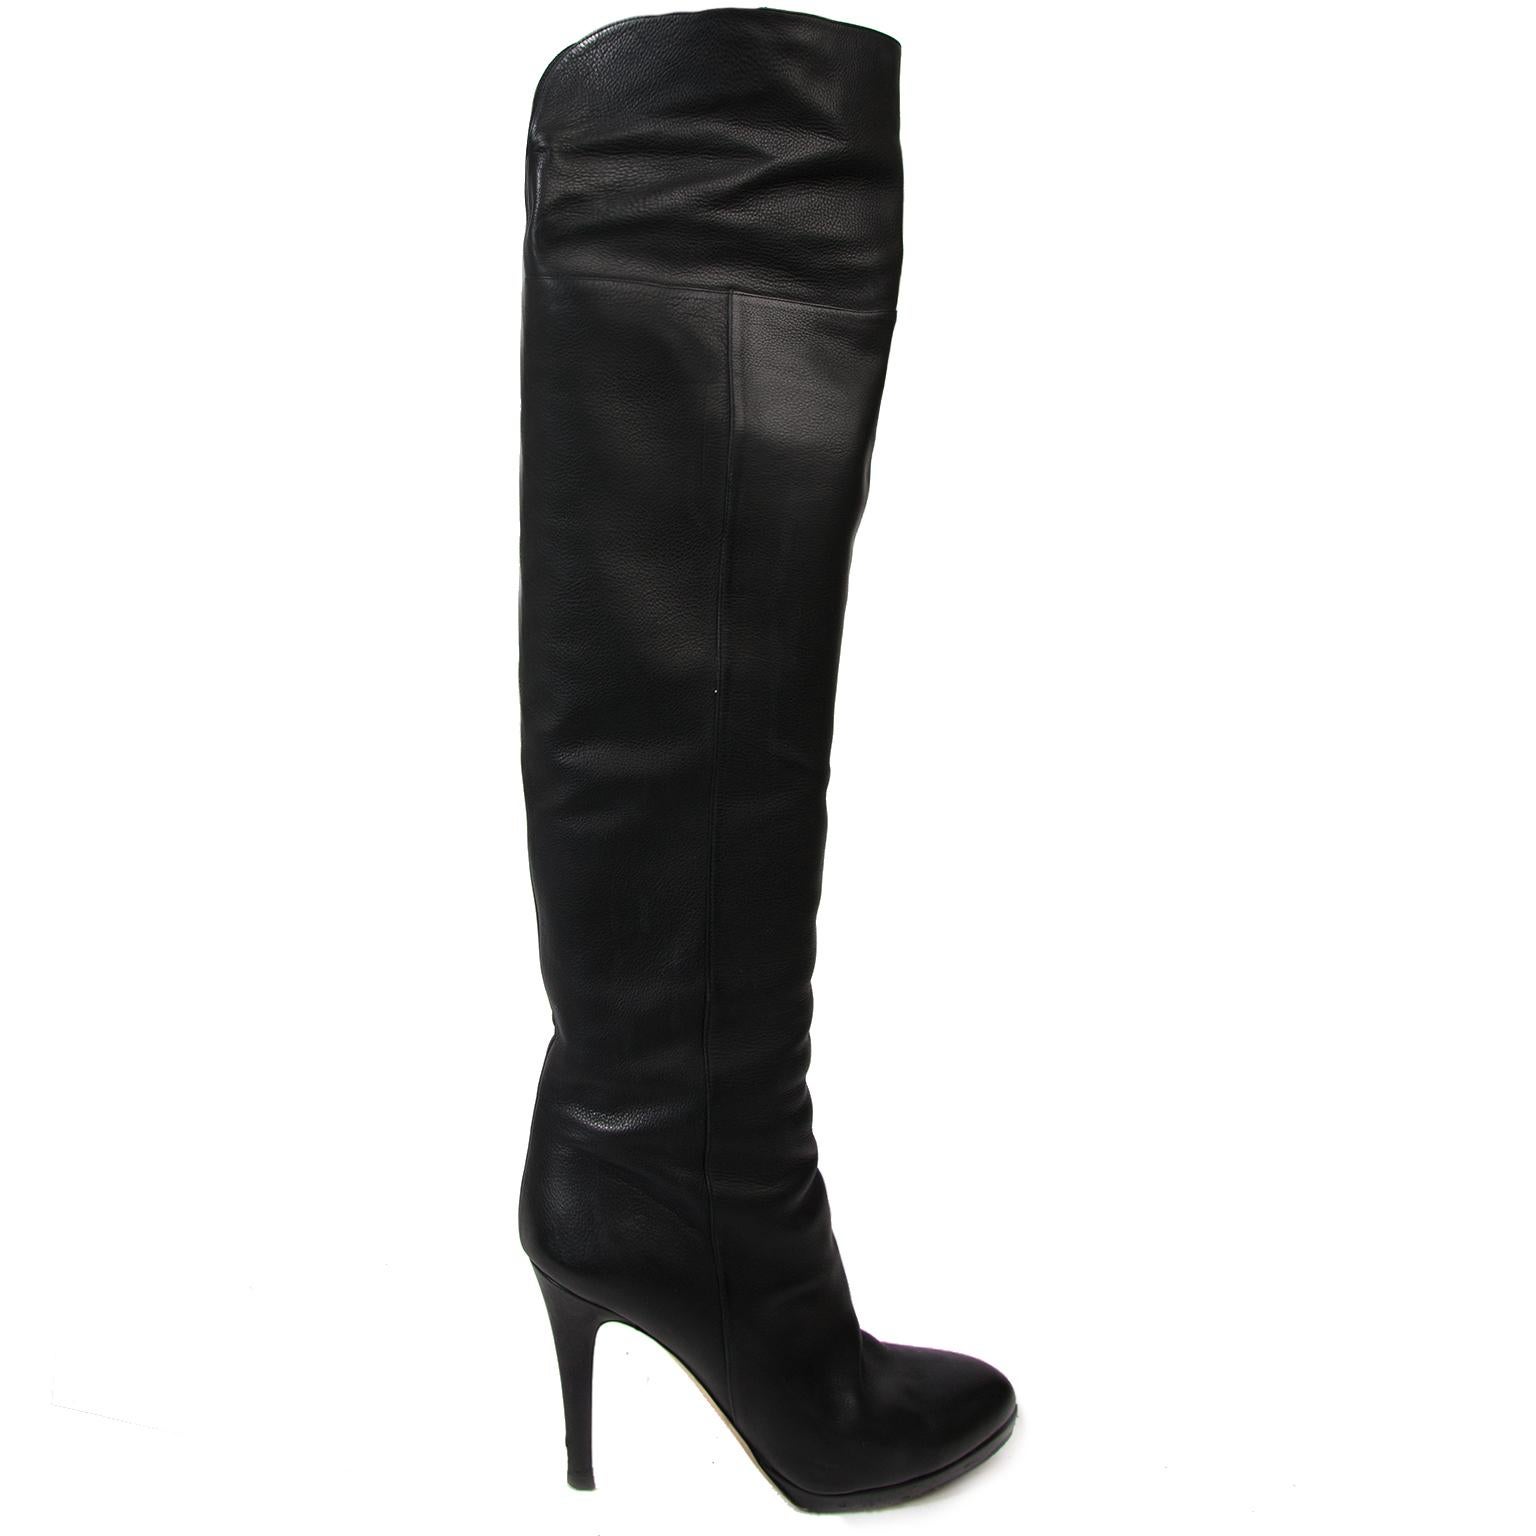 Women's Jimmy Choo Black Leather Lambskin Over The Knee Boots - size 37, 5 For Sale